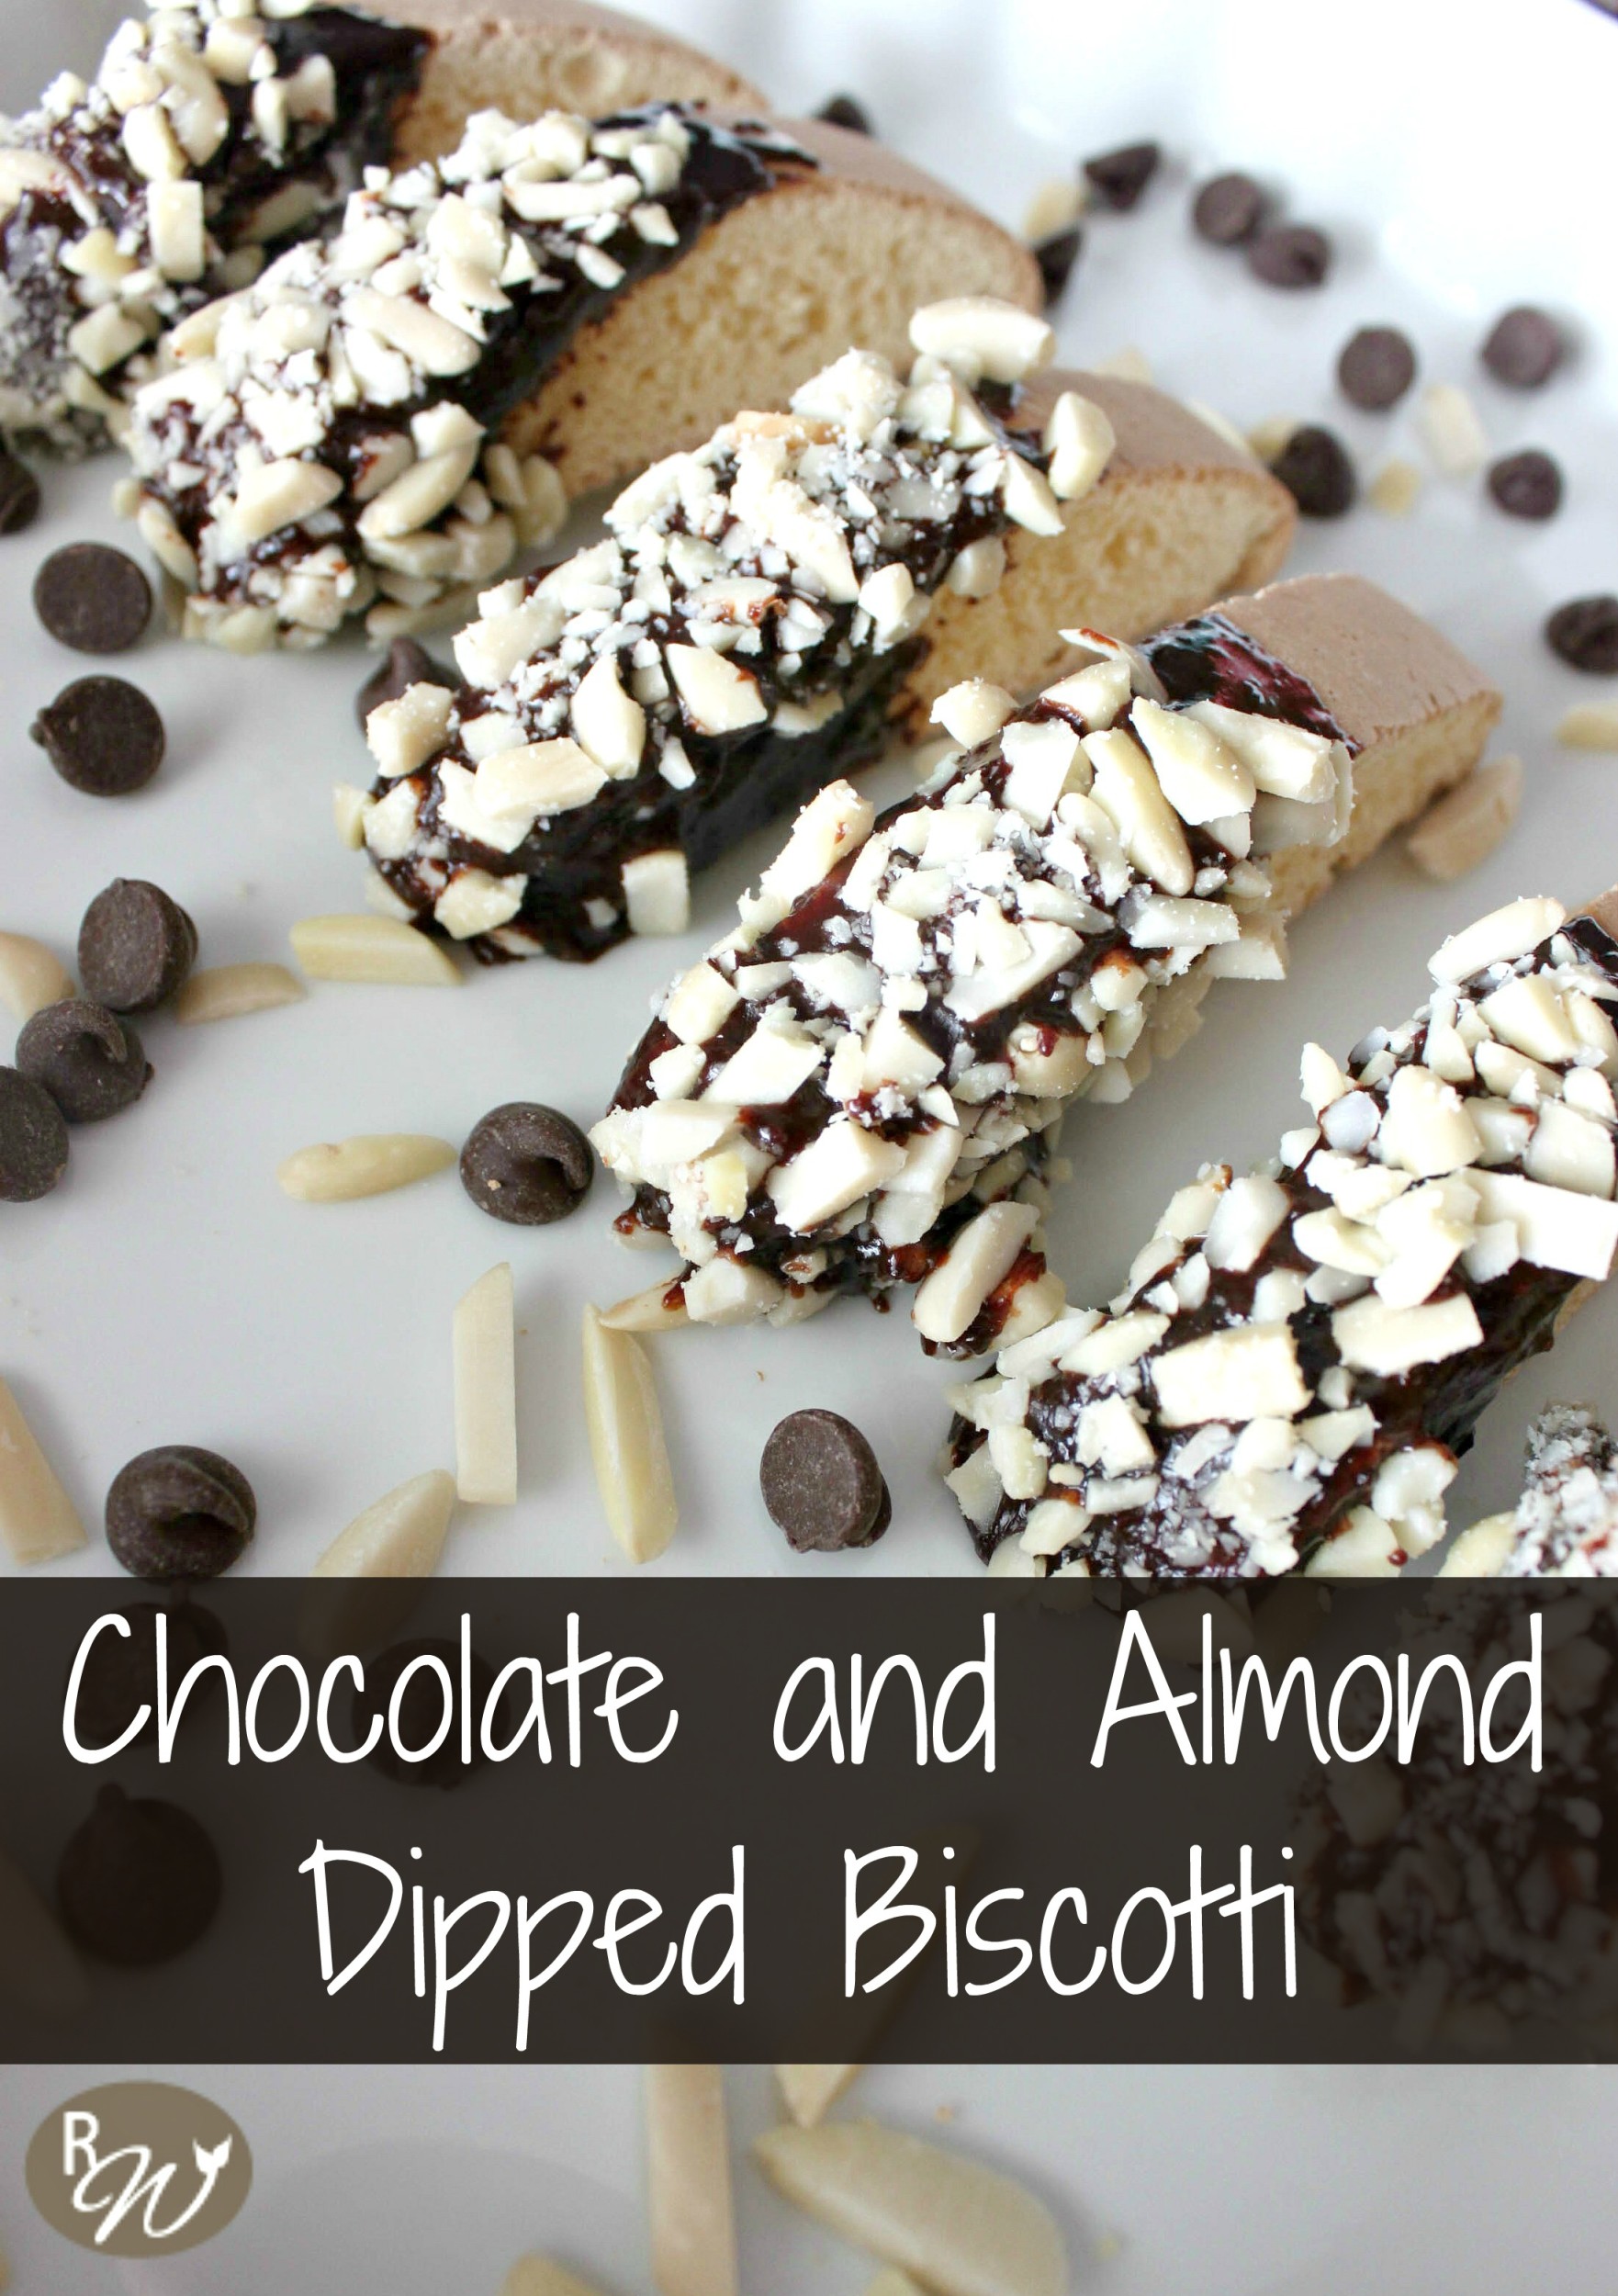 Chocolate and Almond Dipped Biscotti